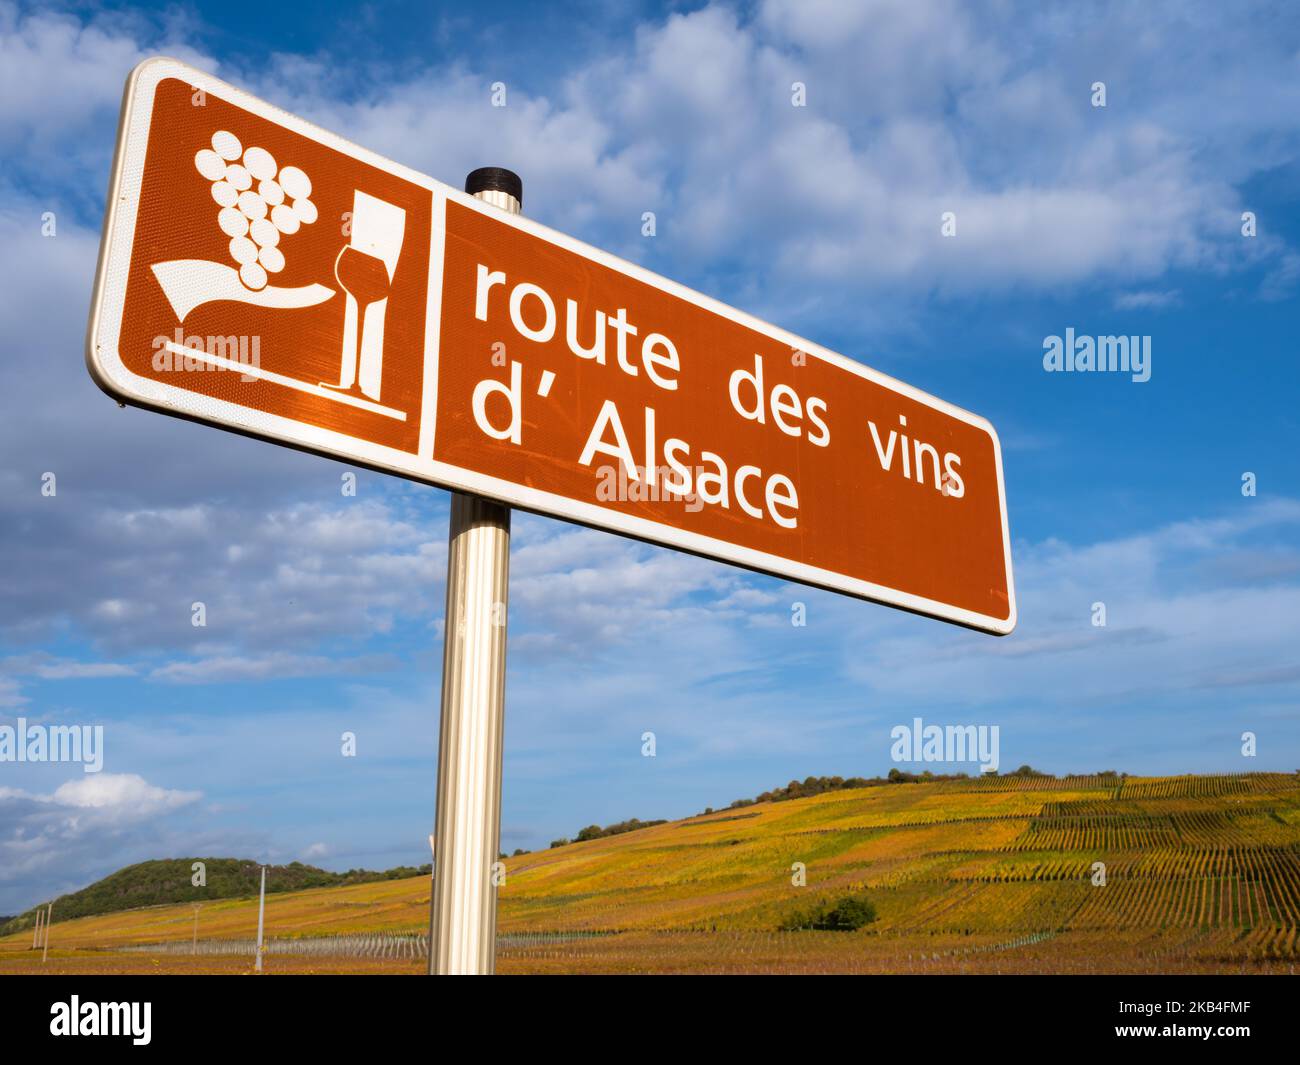 A sign and a symbol of Route des vins in Alsace, France. English translation: Wine route of Alsace Stock Photo